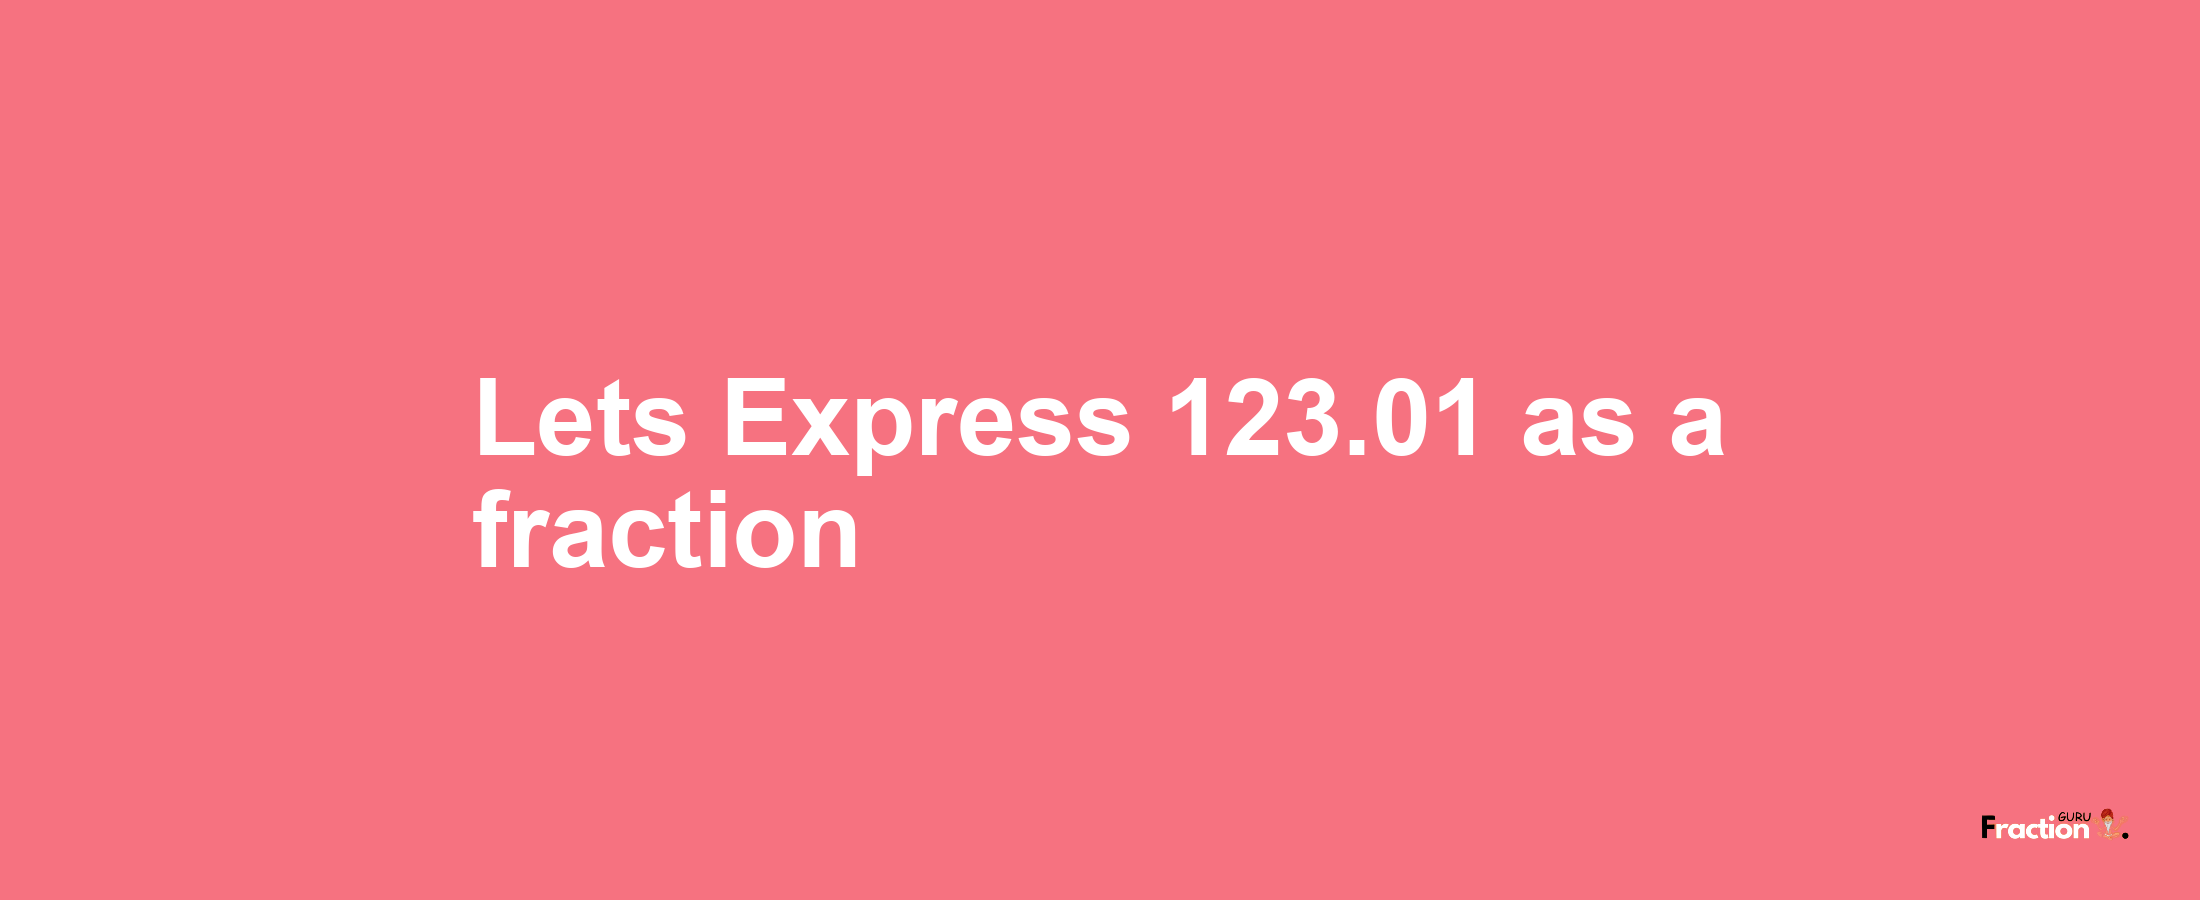 Lets Express 123.01 as afraction